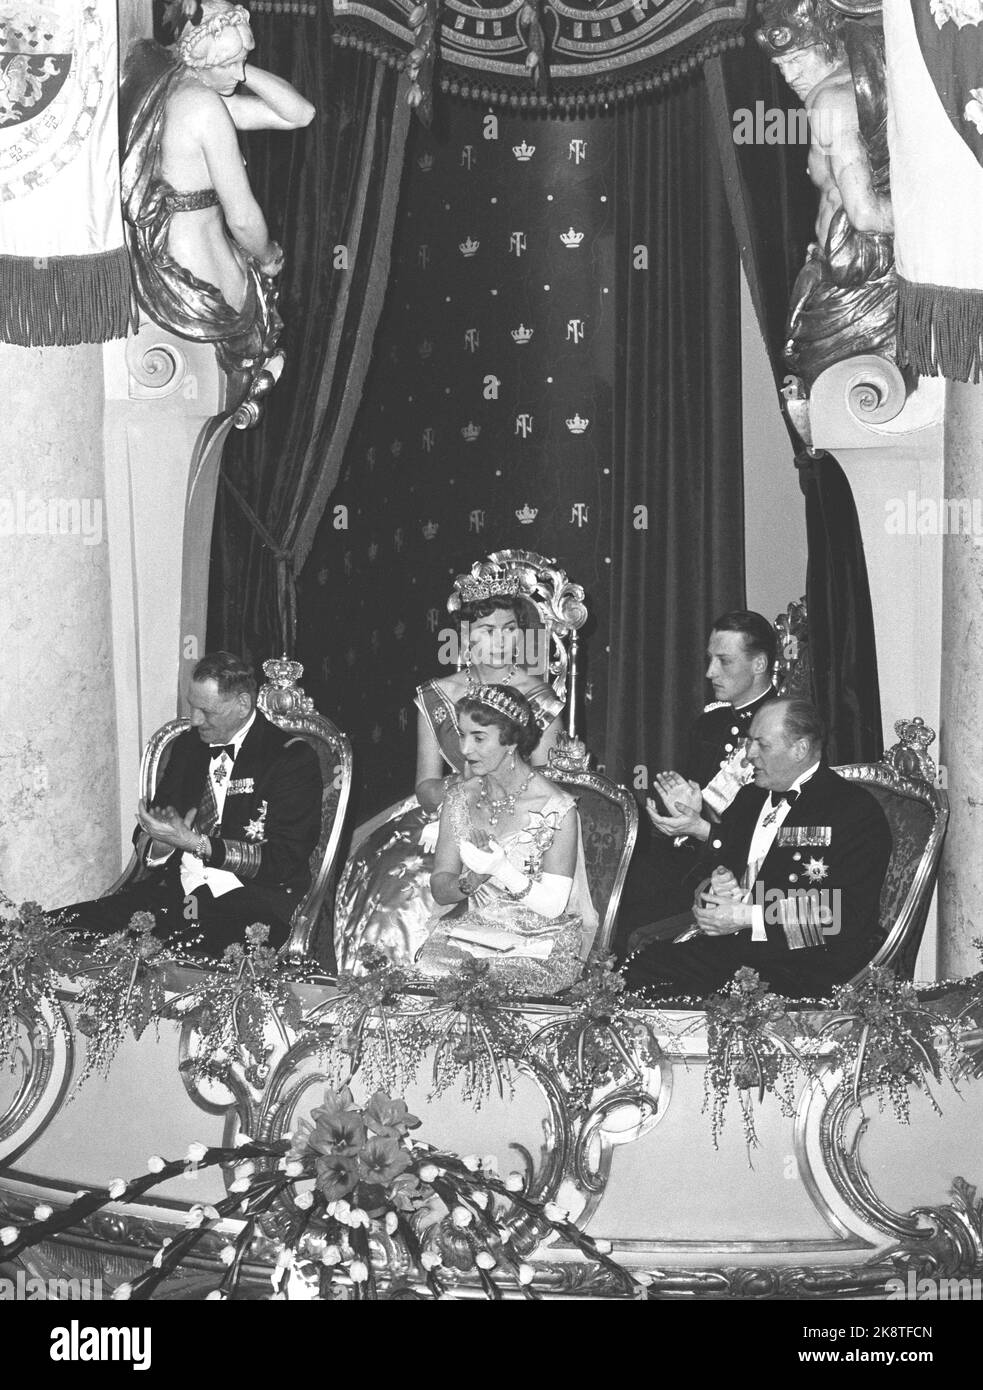 Oslo 196002 11-12. Queen Ingrid and King Frederik of Denmark on an official visit to Norway. Here from the gala performance at the National Theater King Frederik (t Tapes, jewelry and diadems. Flaps. Photo: Ivar Aaserud Current / NTB Stock Photo